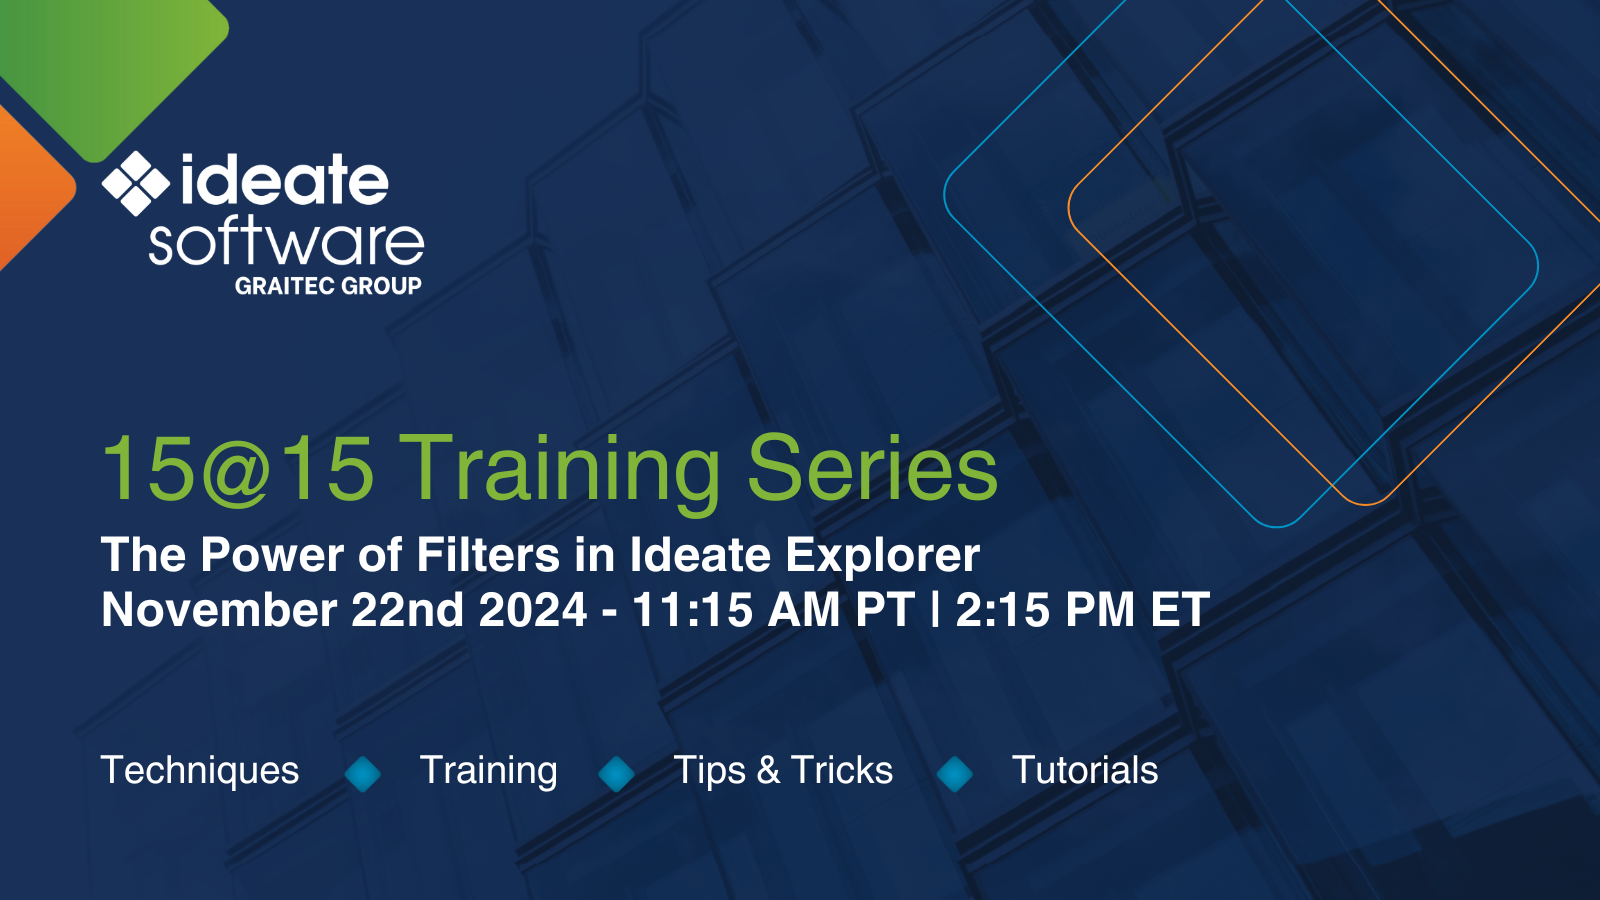 15@15 Ideate Software Training Series 